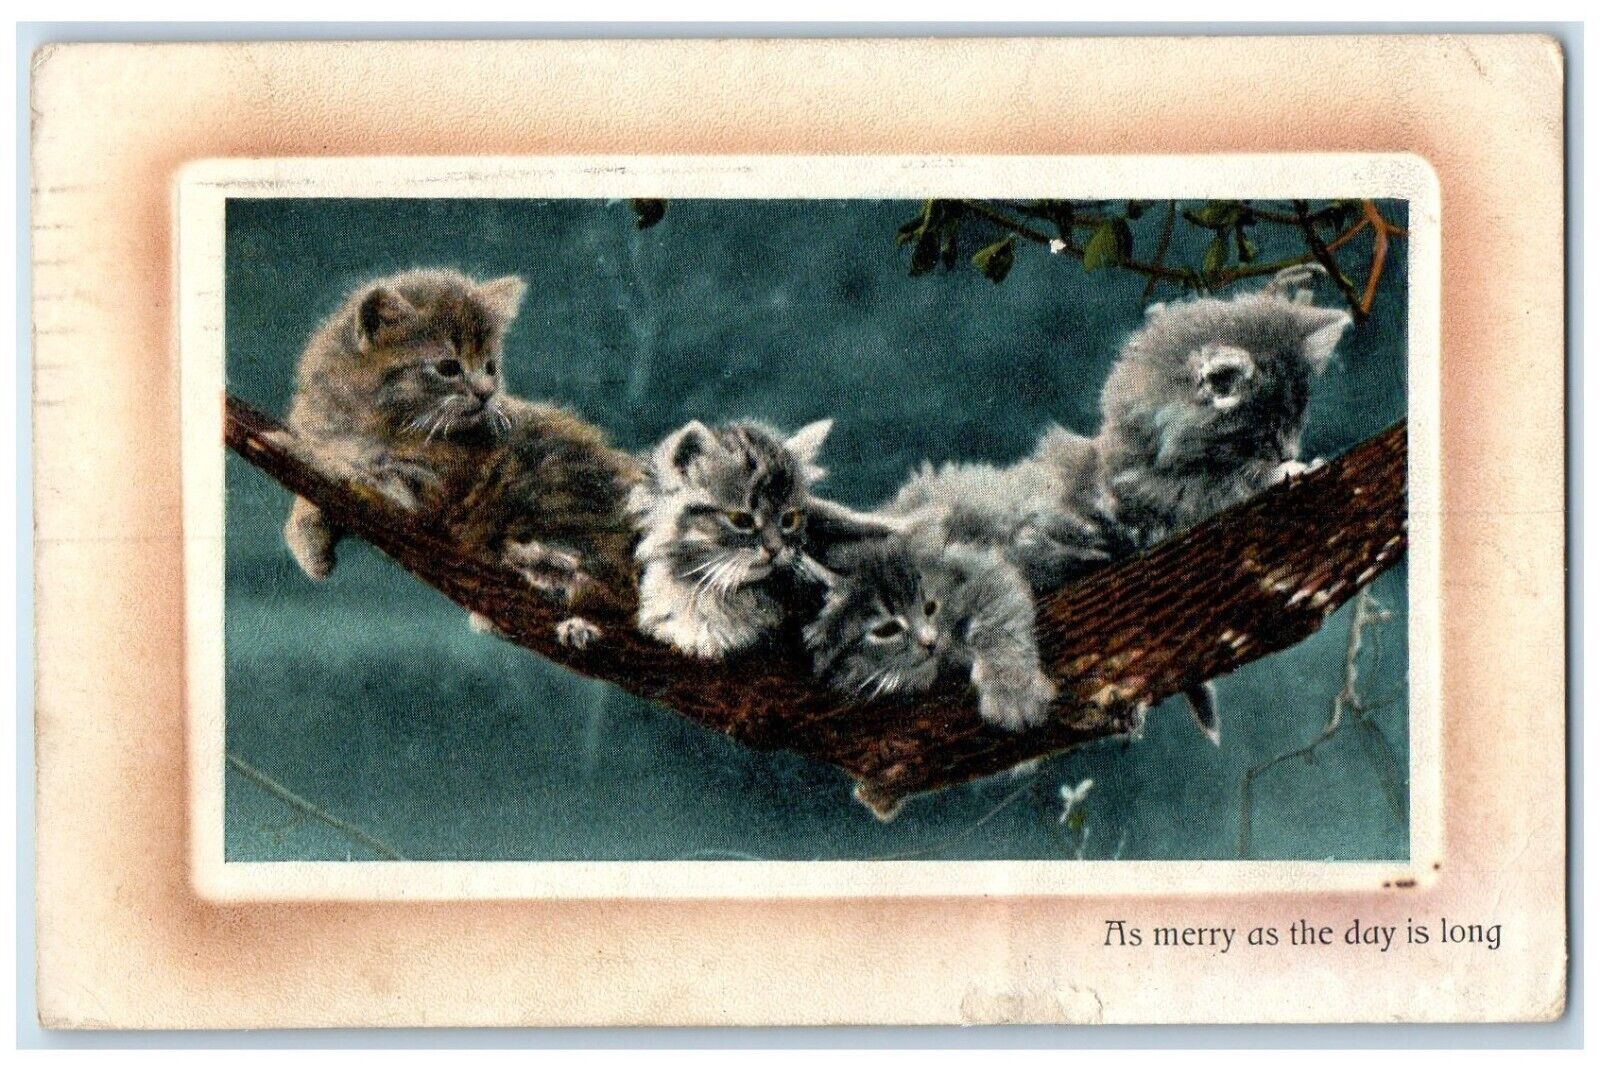 1910 Cute Kitten Hammock As Merry As The Day Is Long Vineland NJ Posted Postcard